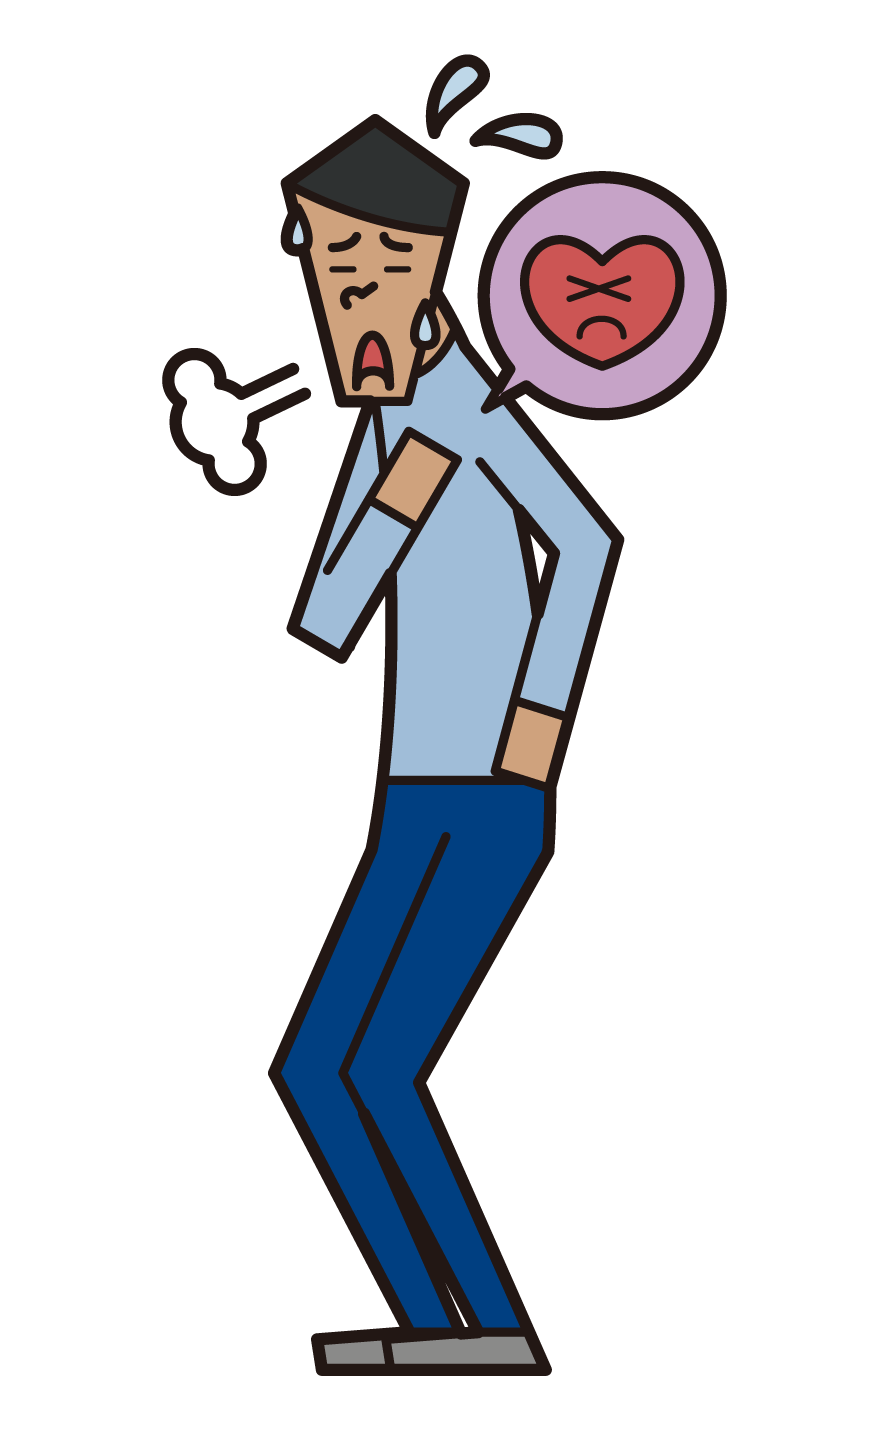 Illustration of a person (male) who feels palpitations